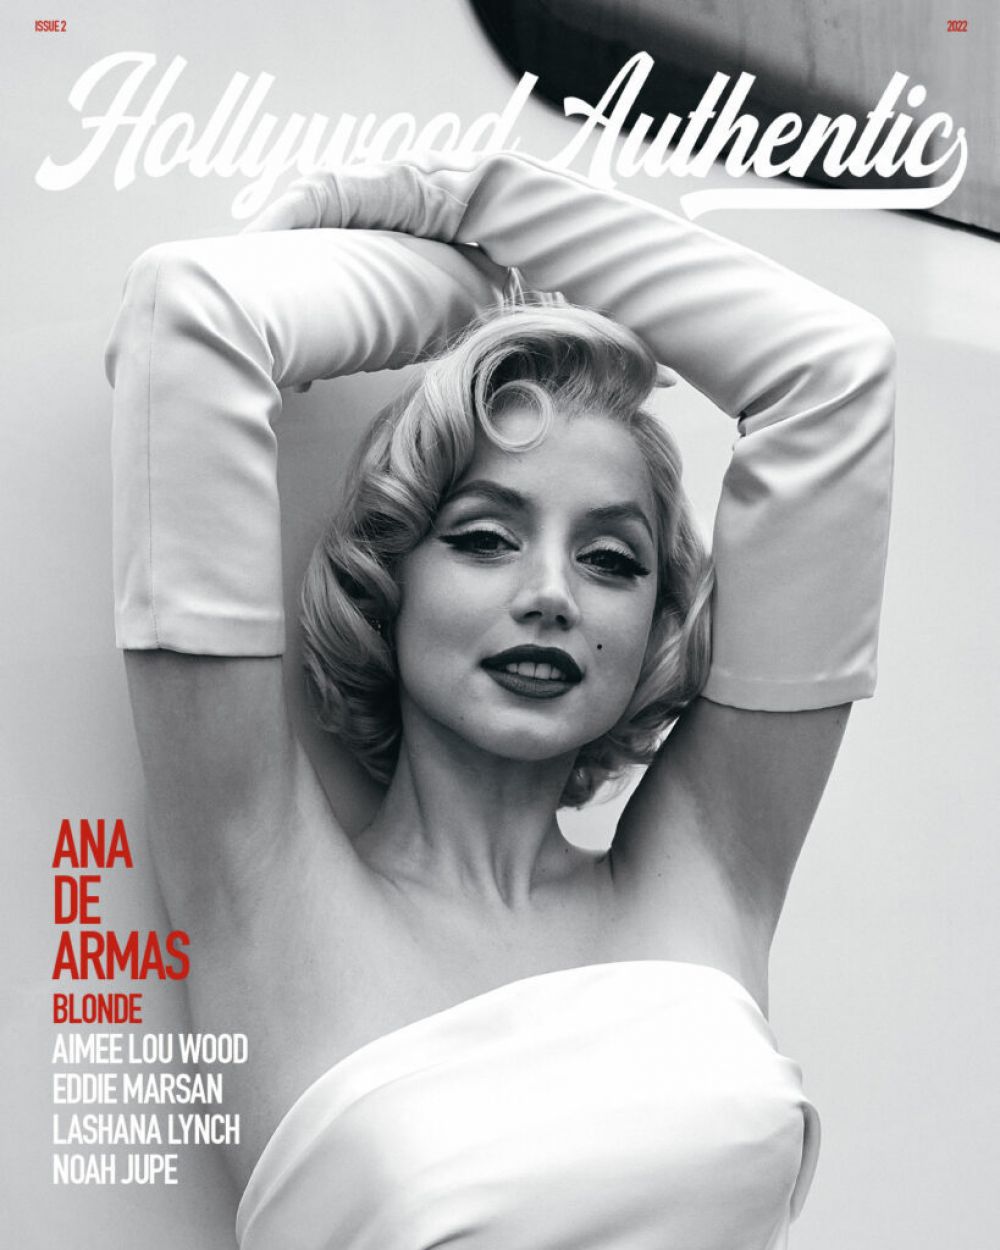 Ana de Armas Poses for Hollywood Authentic Magazine, October 2022